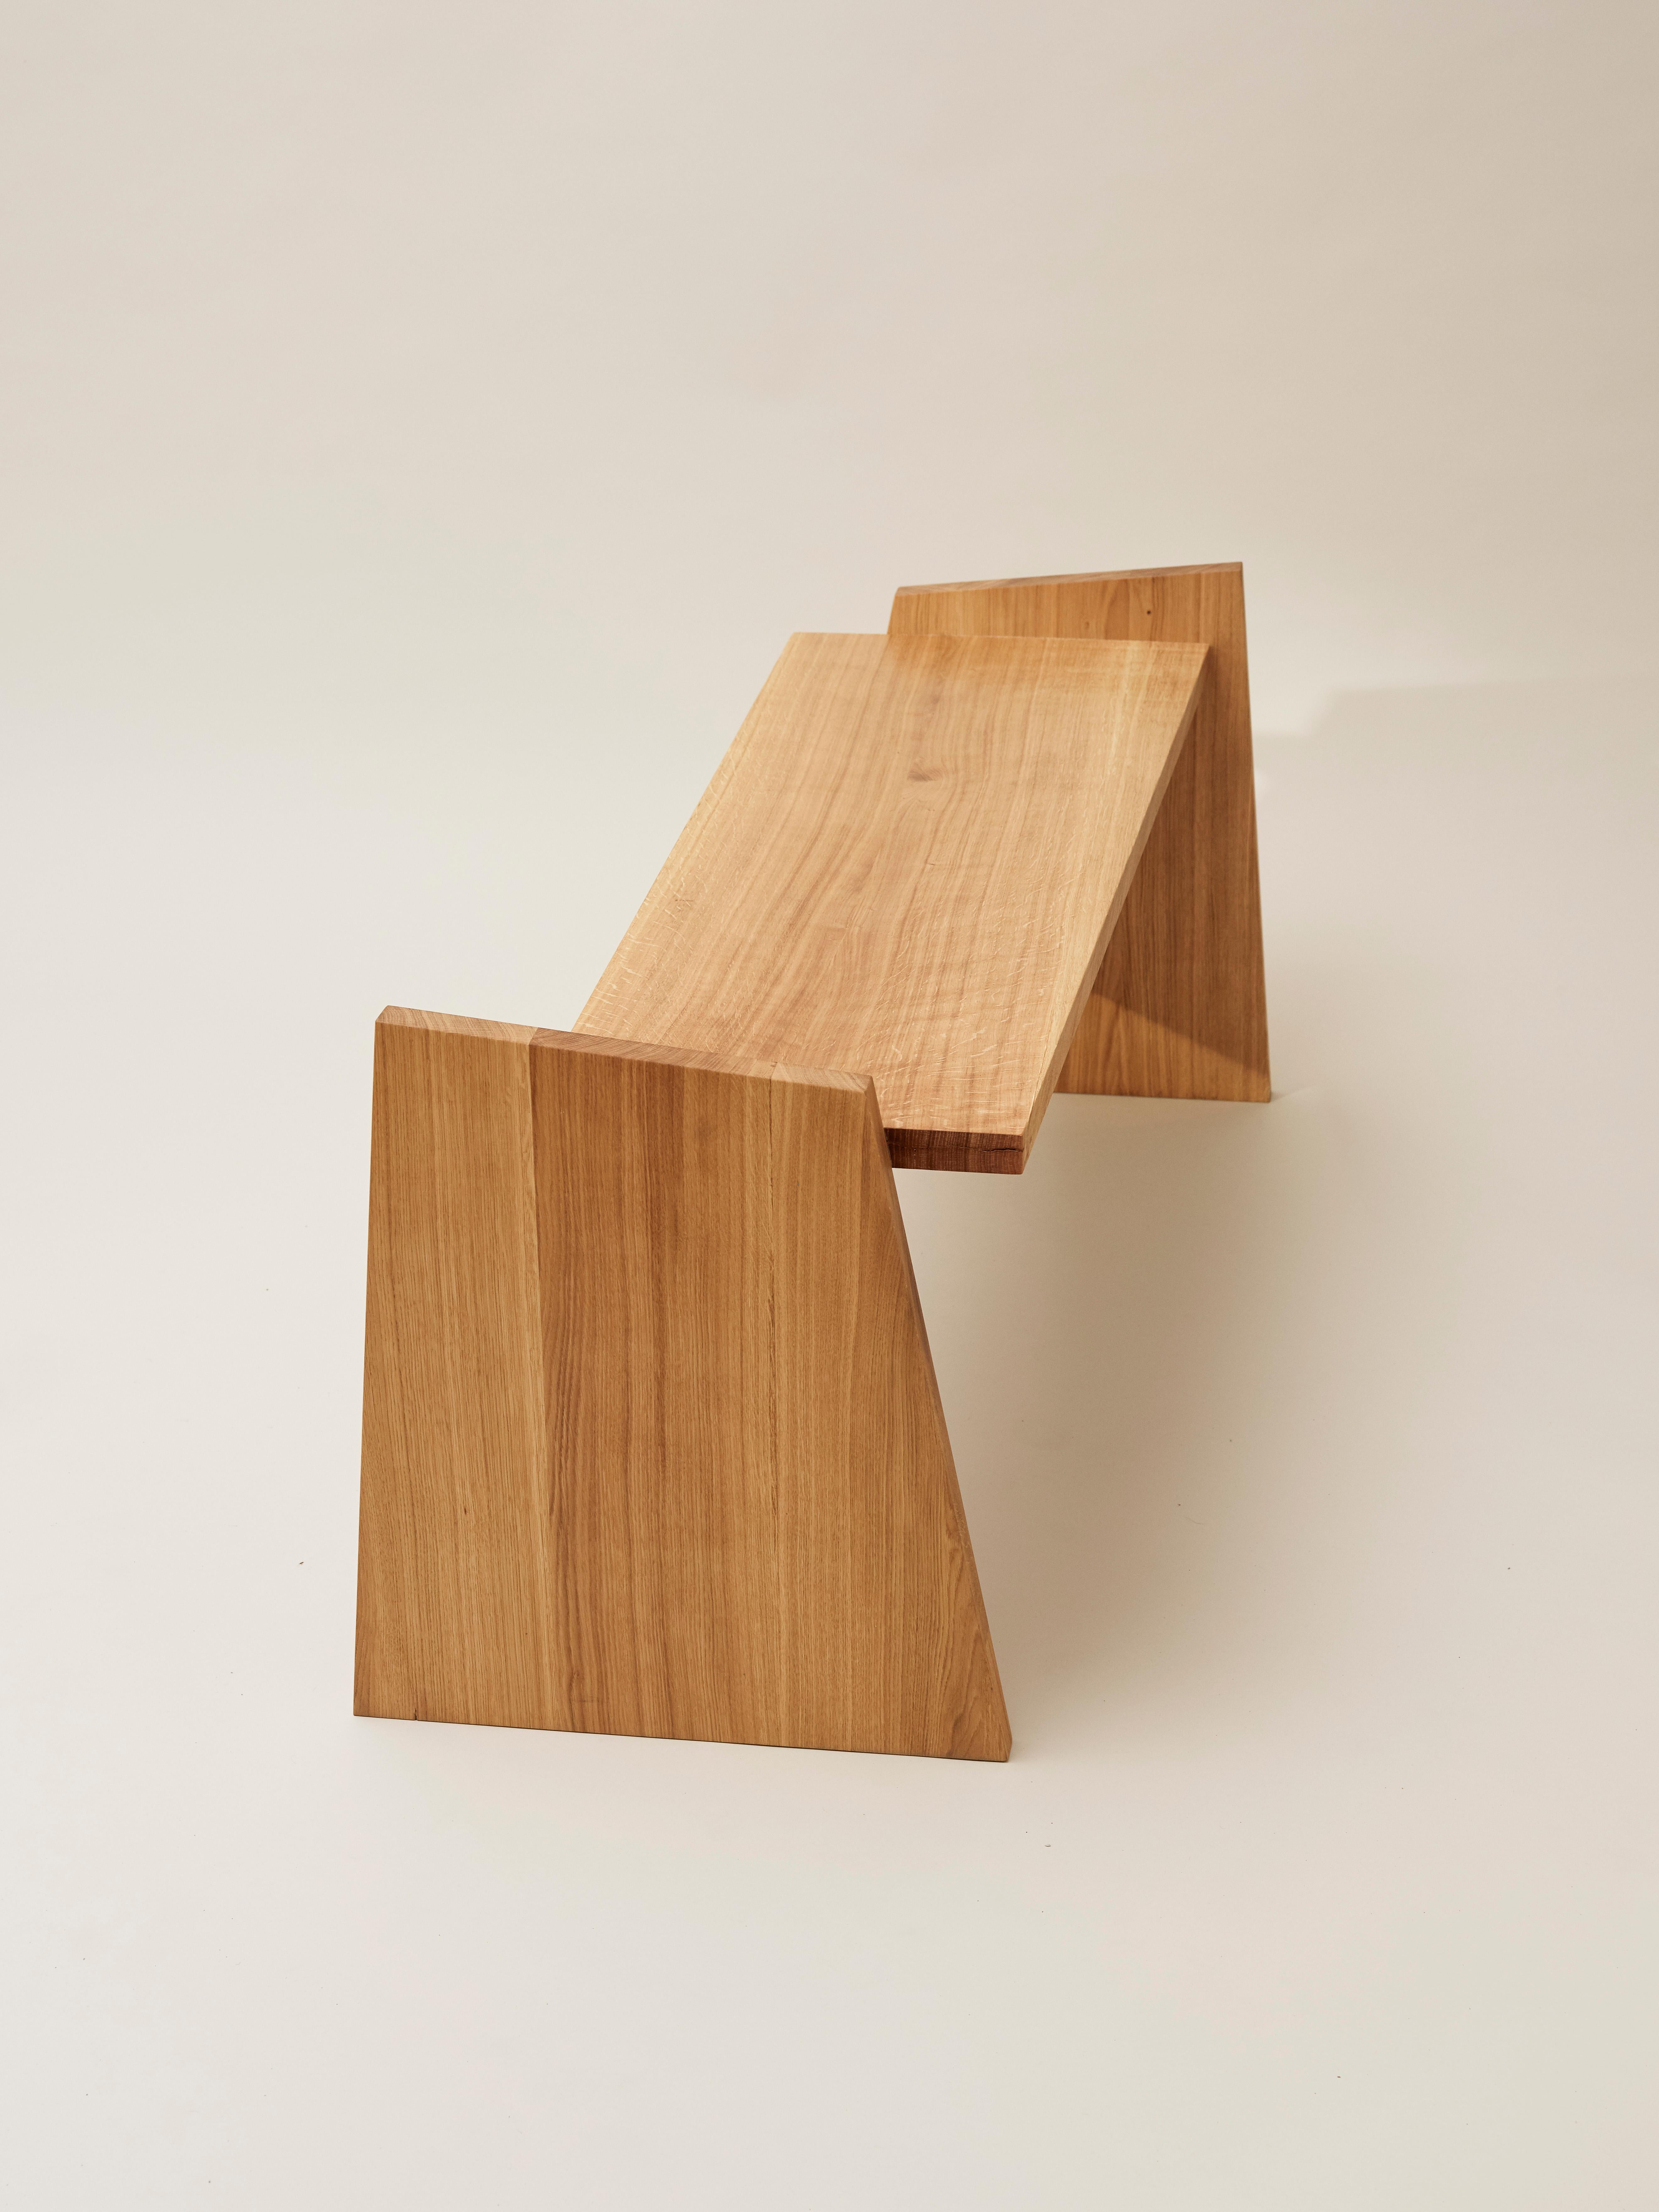 Crooked bench by Nazara Lazaro
Dimensions: H 57 cm x W 120 cm x D 52 cm
Materials: Massive oak with oil wax surface

Also available in natural massive oak, walnut, and white lacquered wood.

The Crooked Collection is an ongoing series of